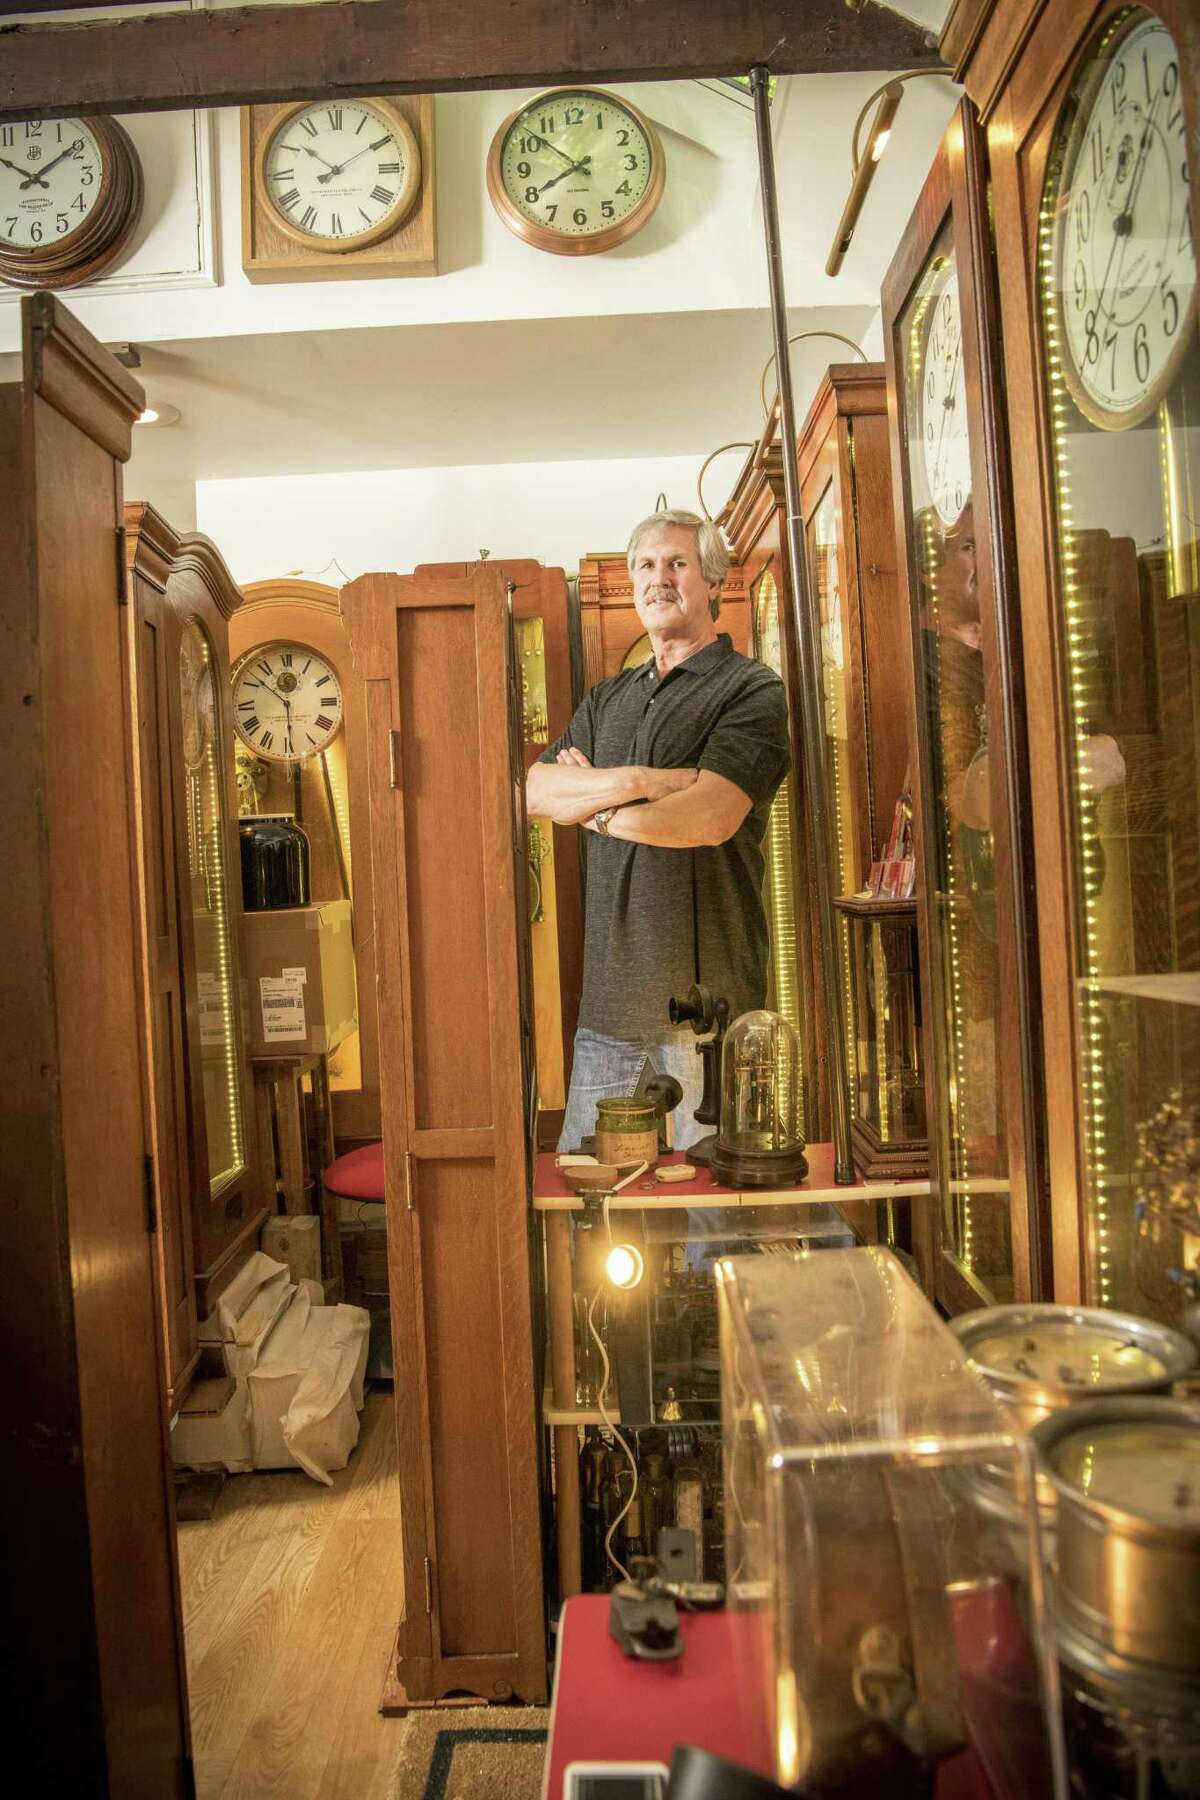 Dave Deitrich with some of his restore clocks in his tiny Stamford workshop.